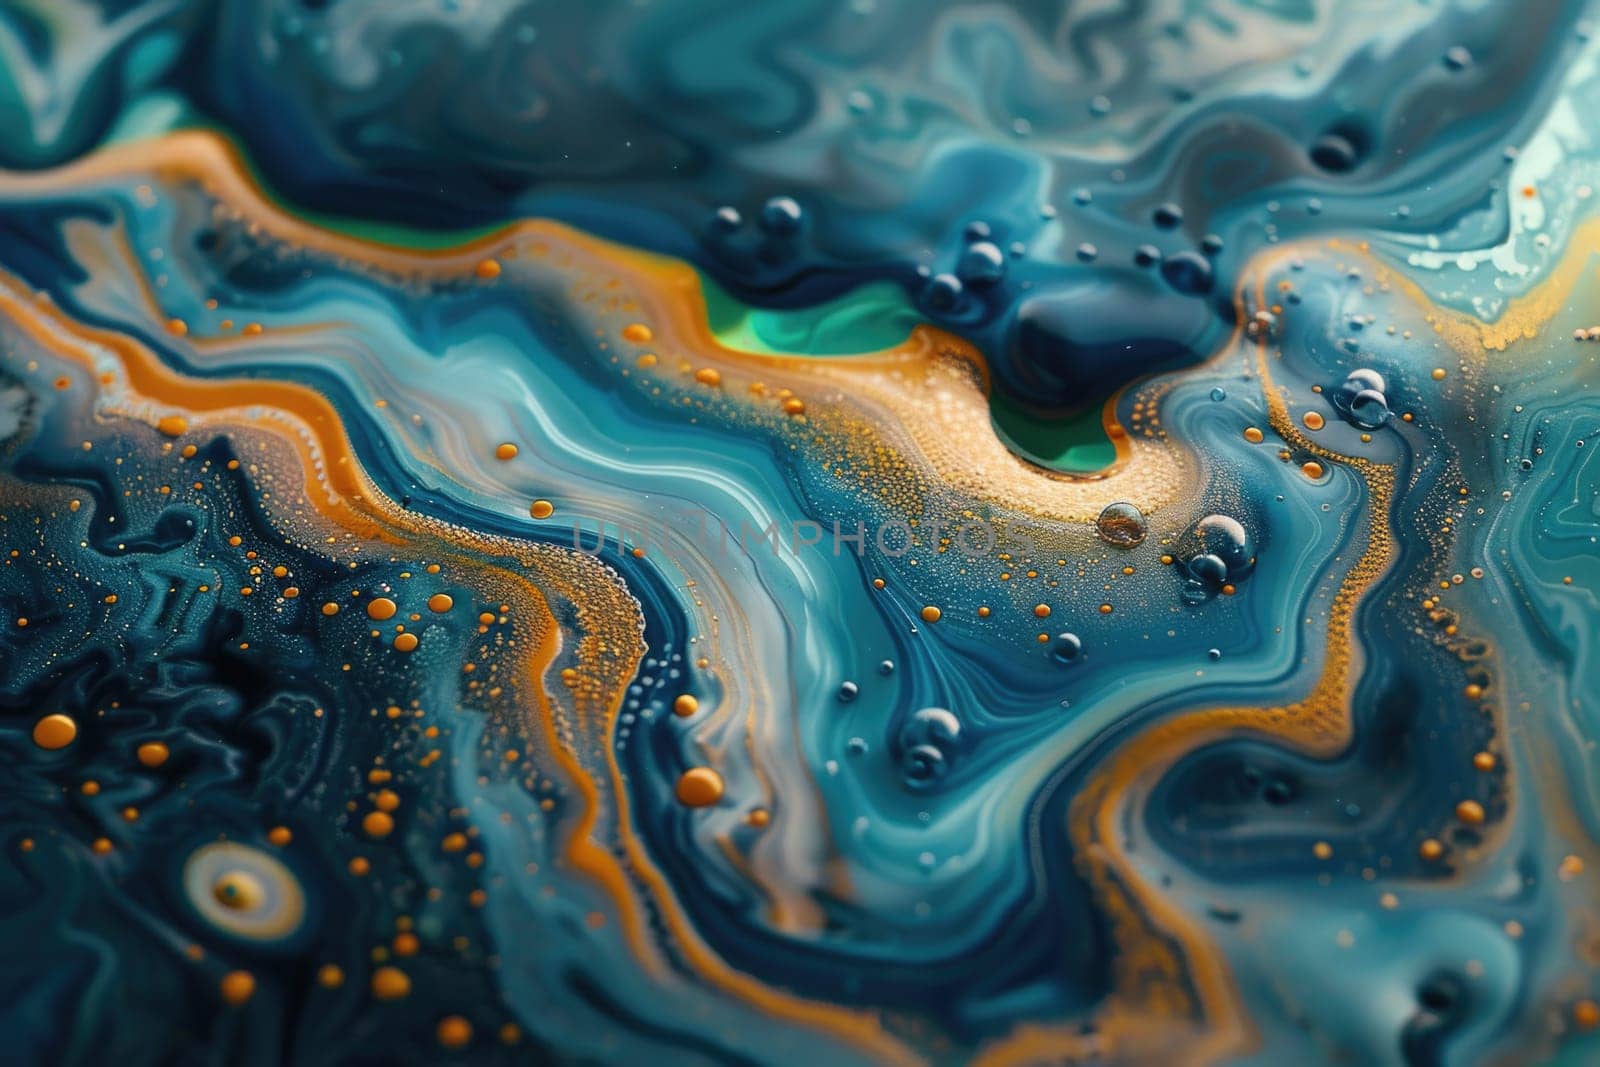 Detailed view of vivid blue and yellow liquid, displaying a mix of colors and textures.